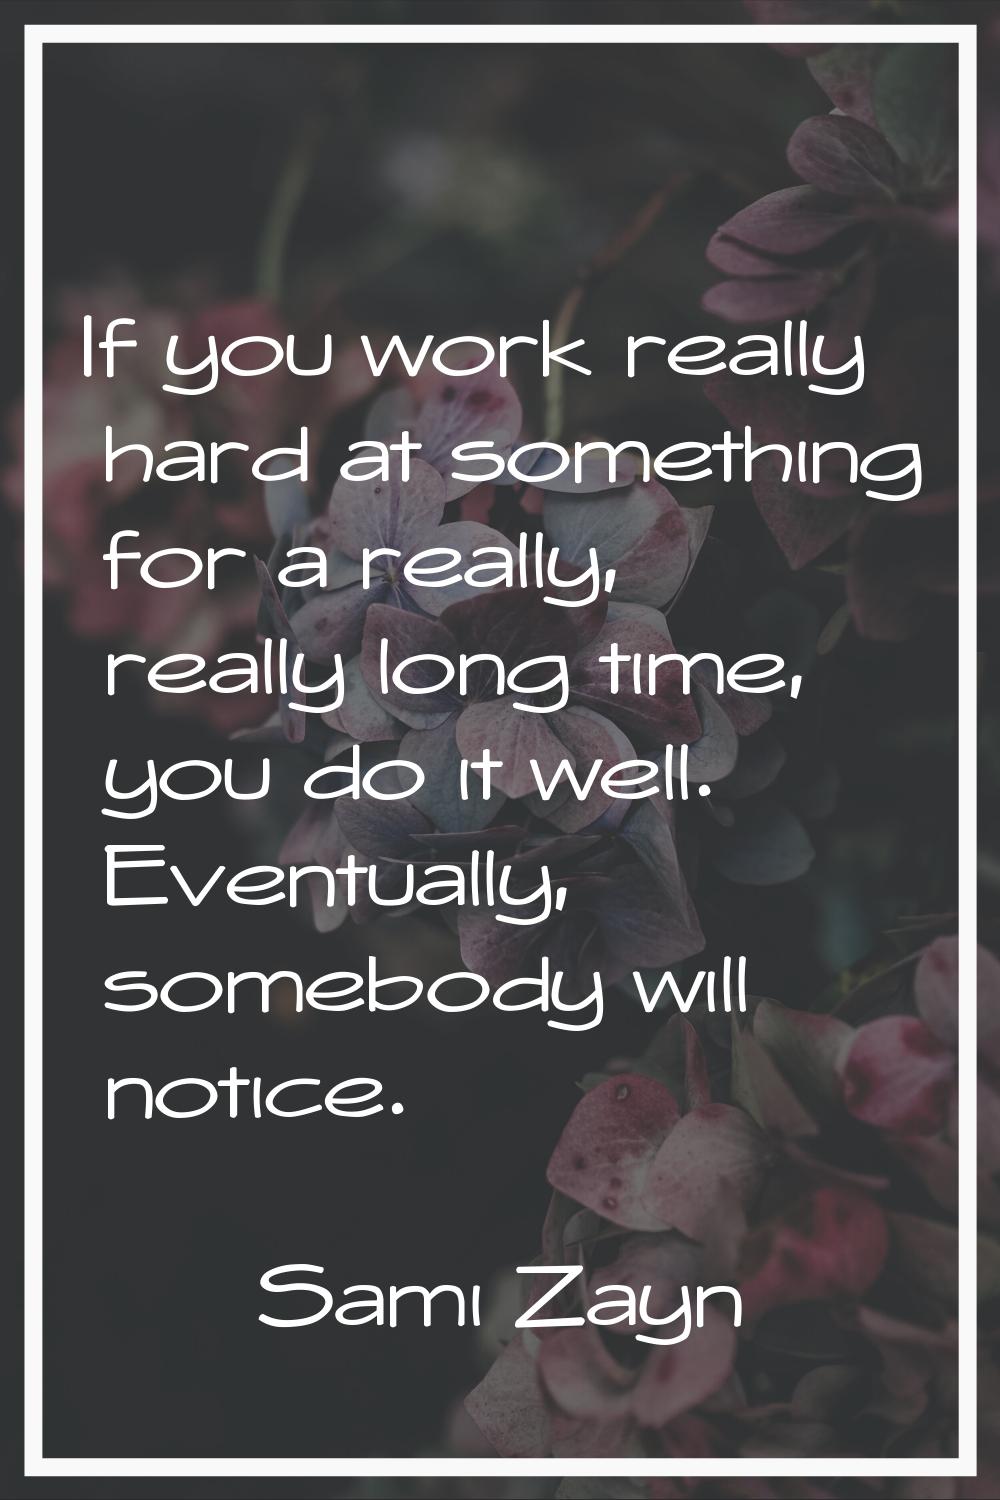 If you work really hard at something for a really, really long time, you do it well. Eventually, so